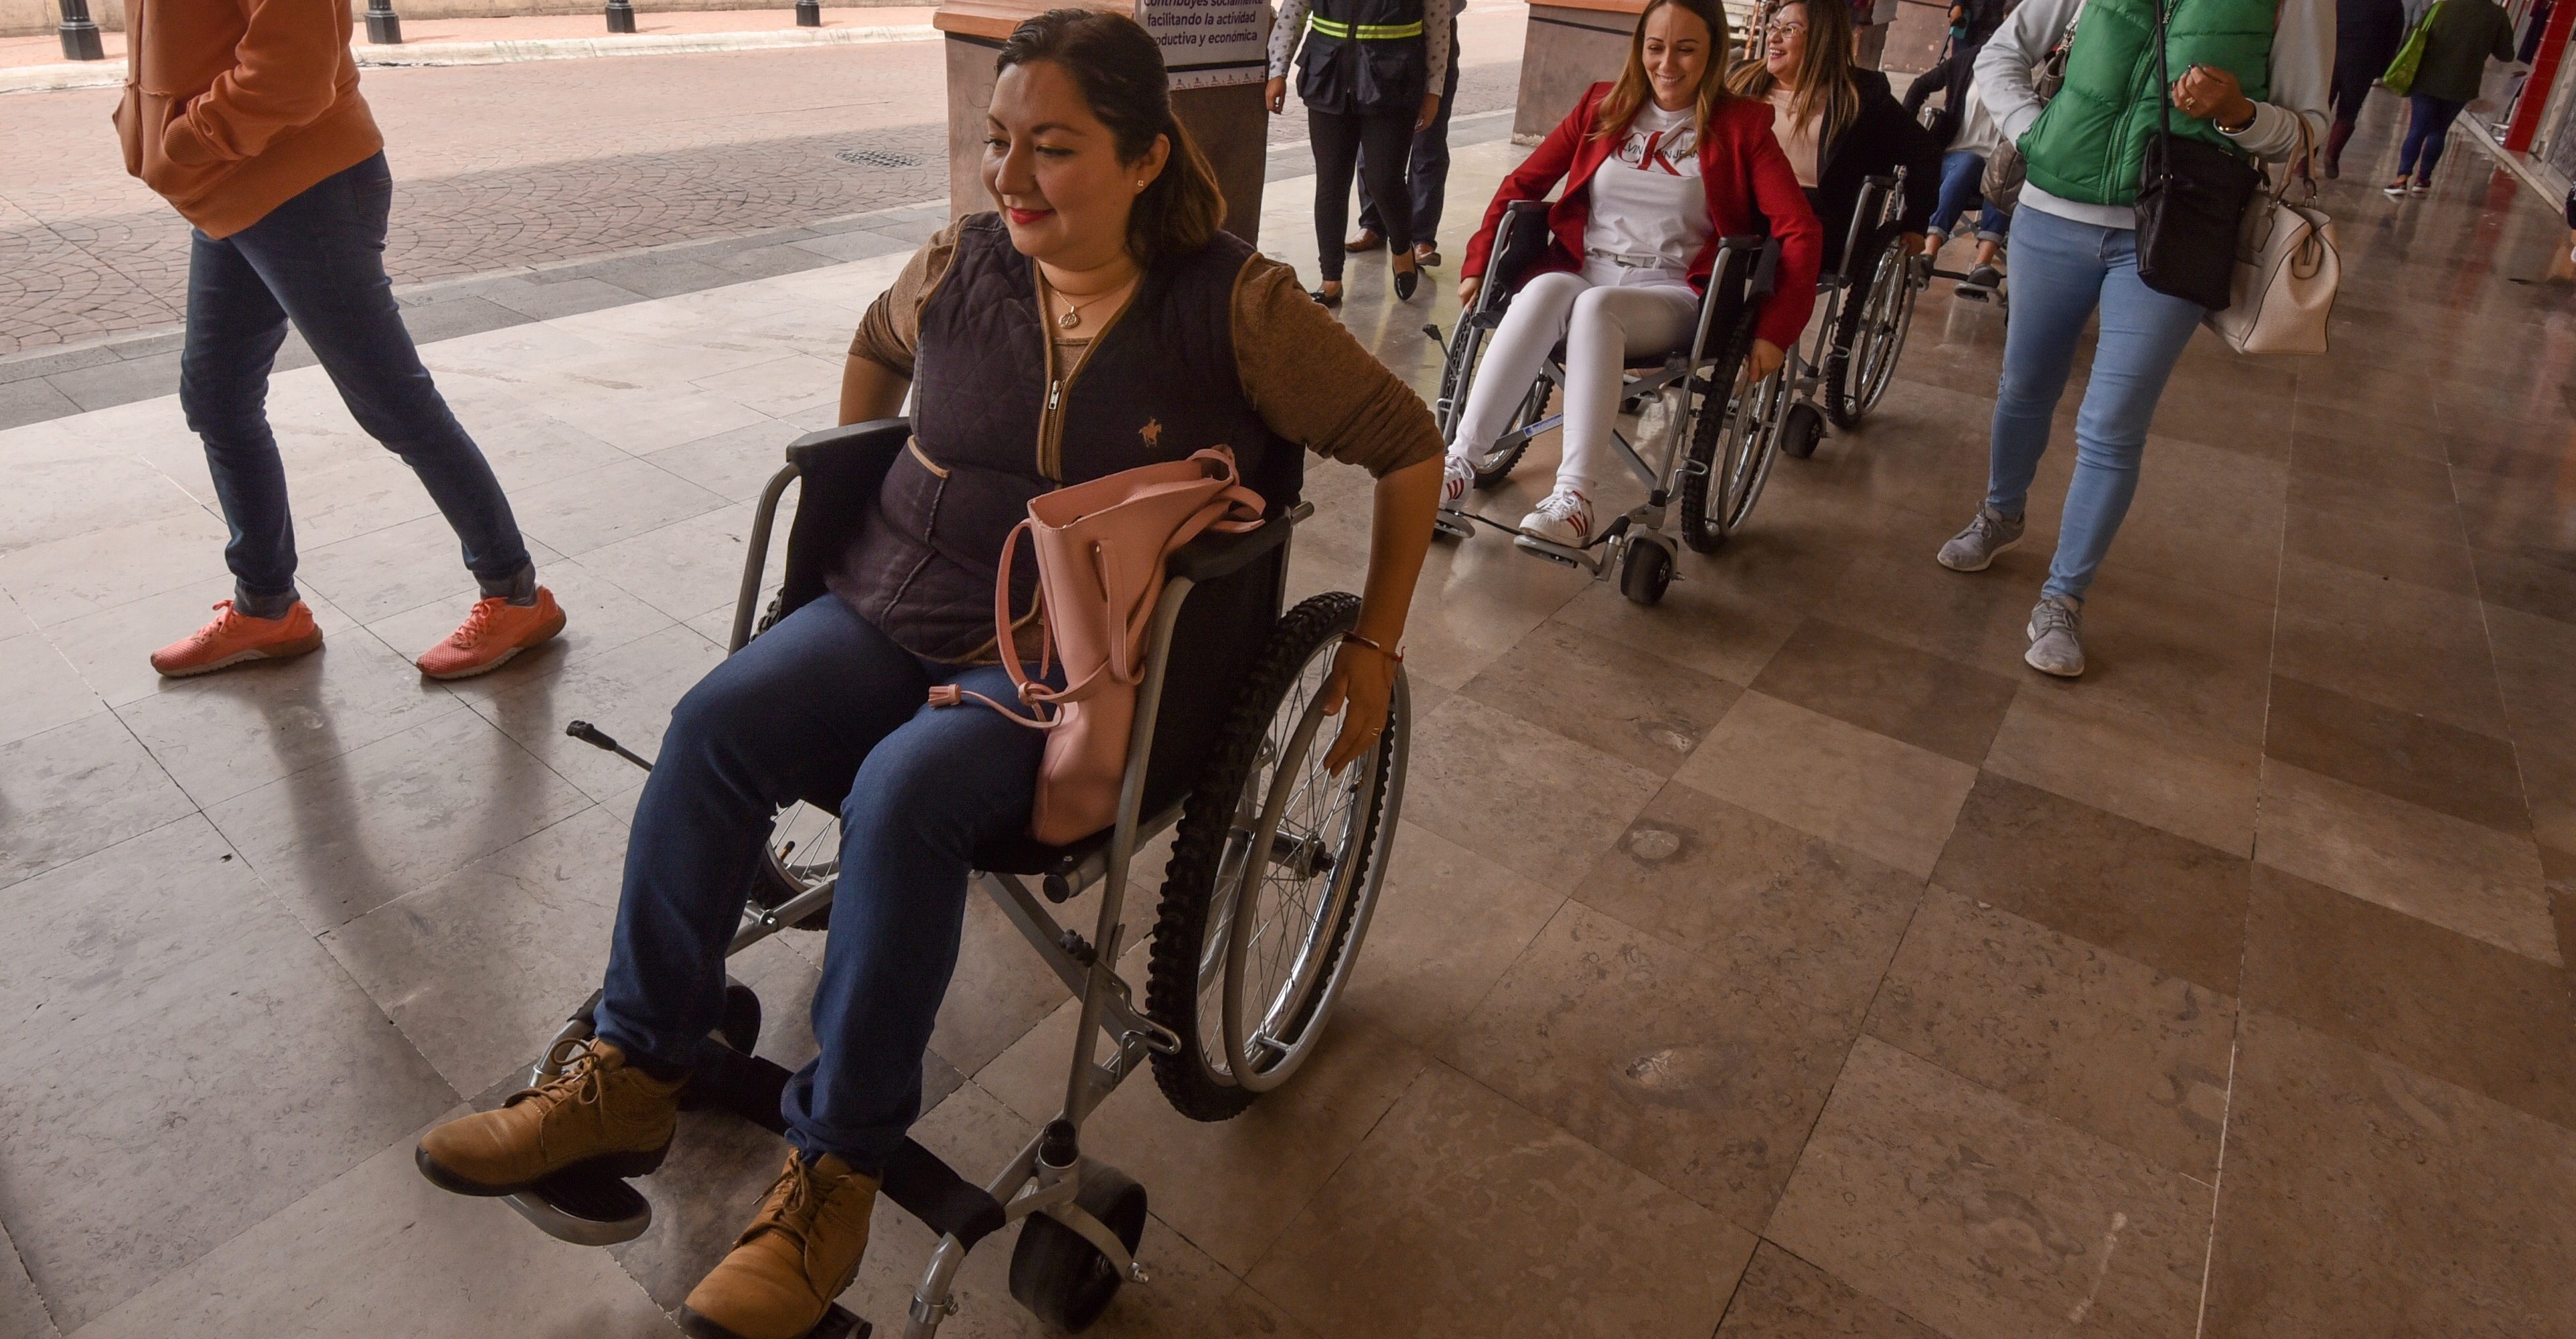 1 in 2 people with disabilities see that they do not respect their rights